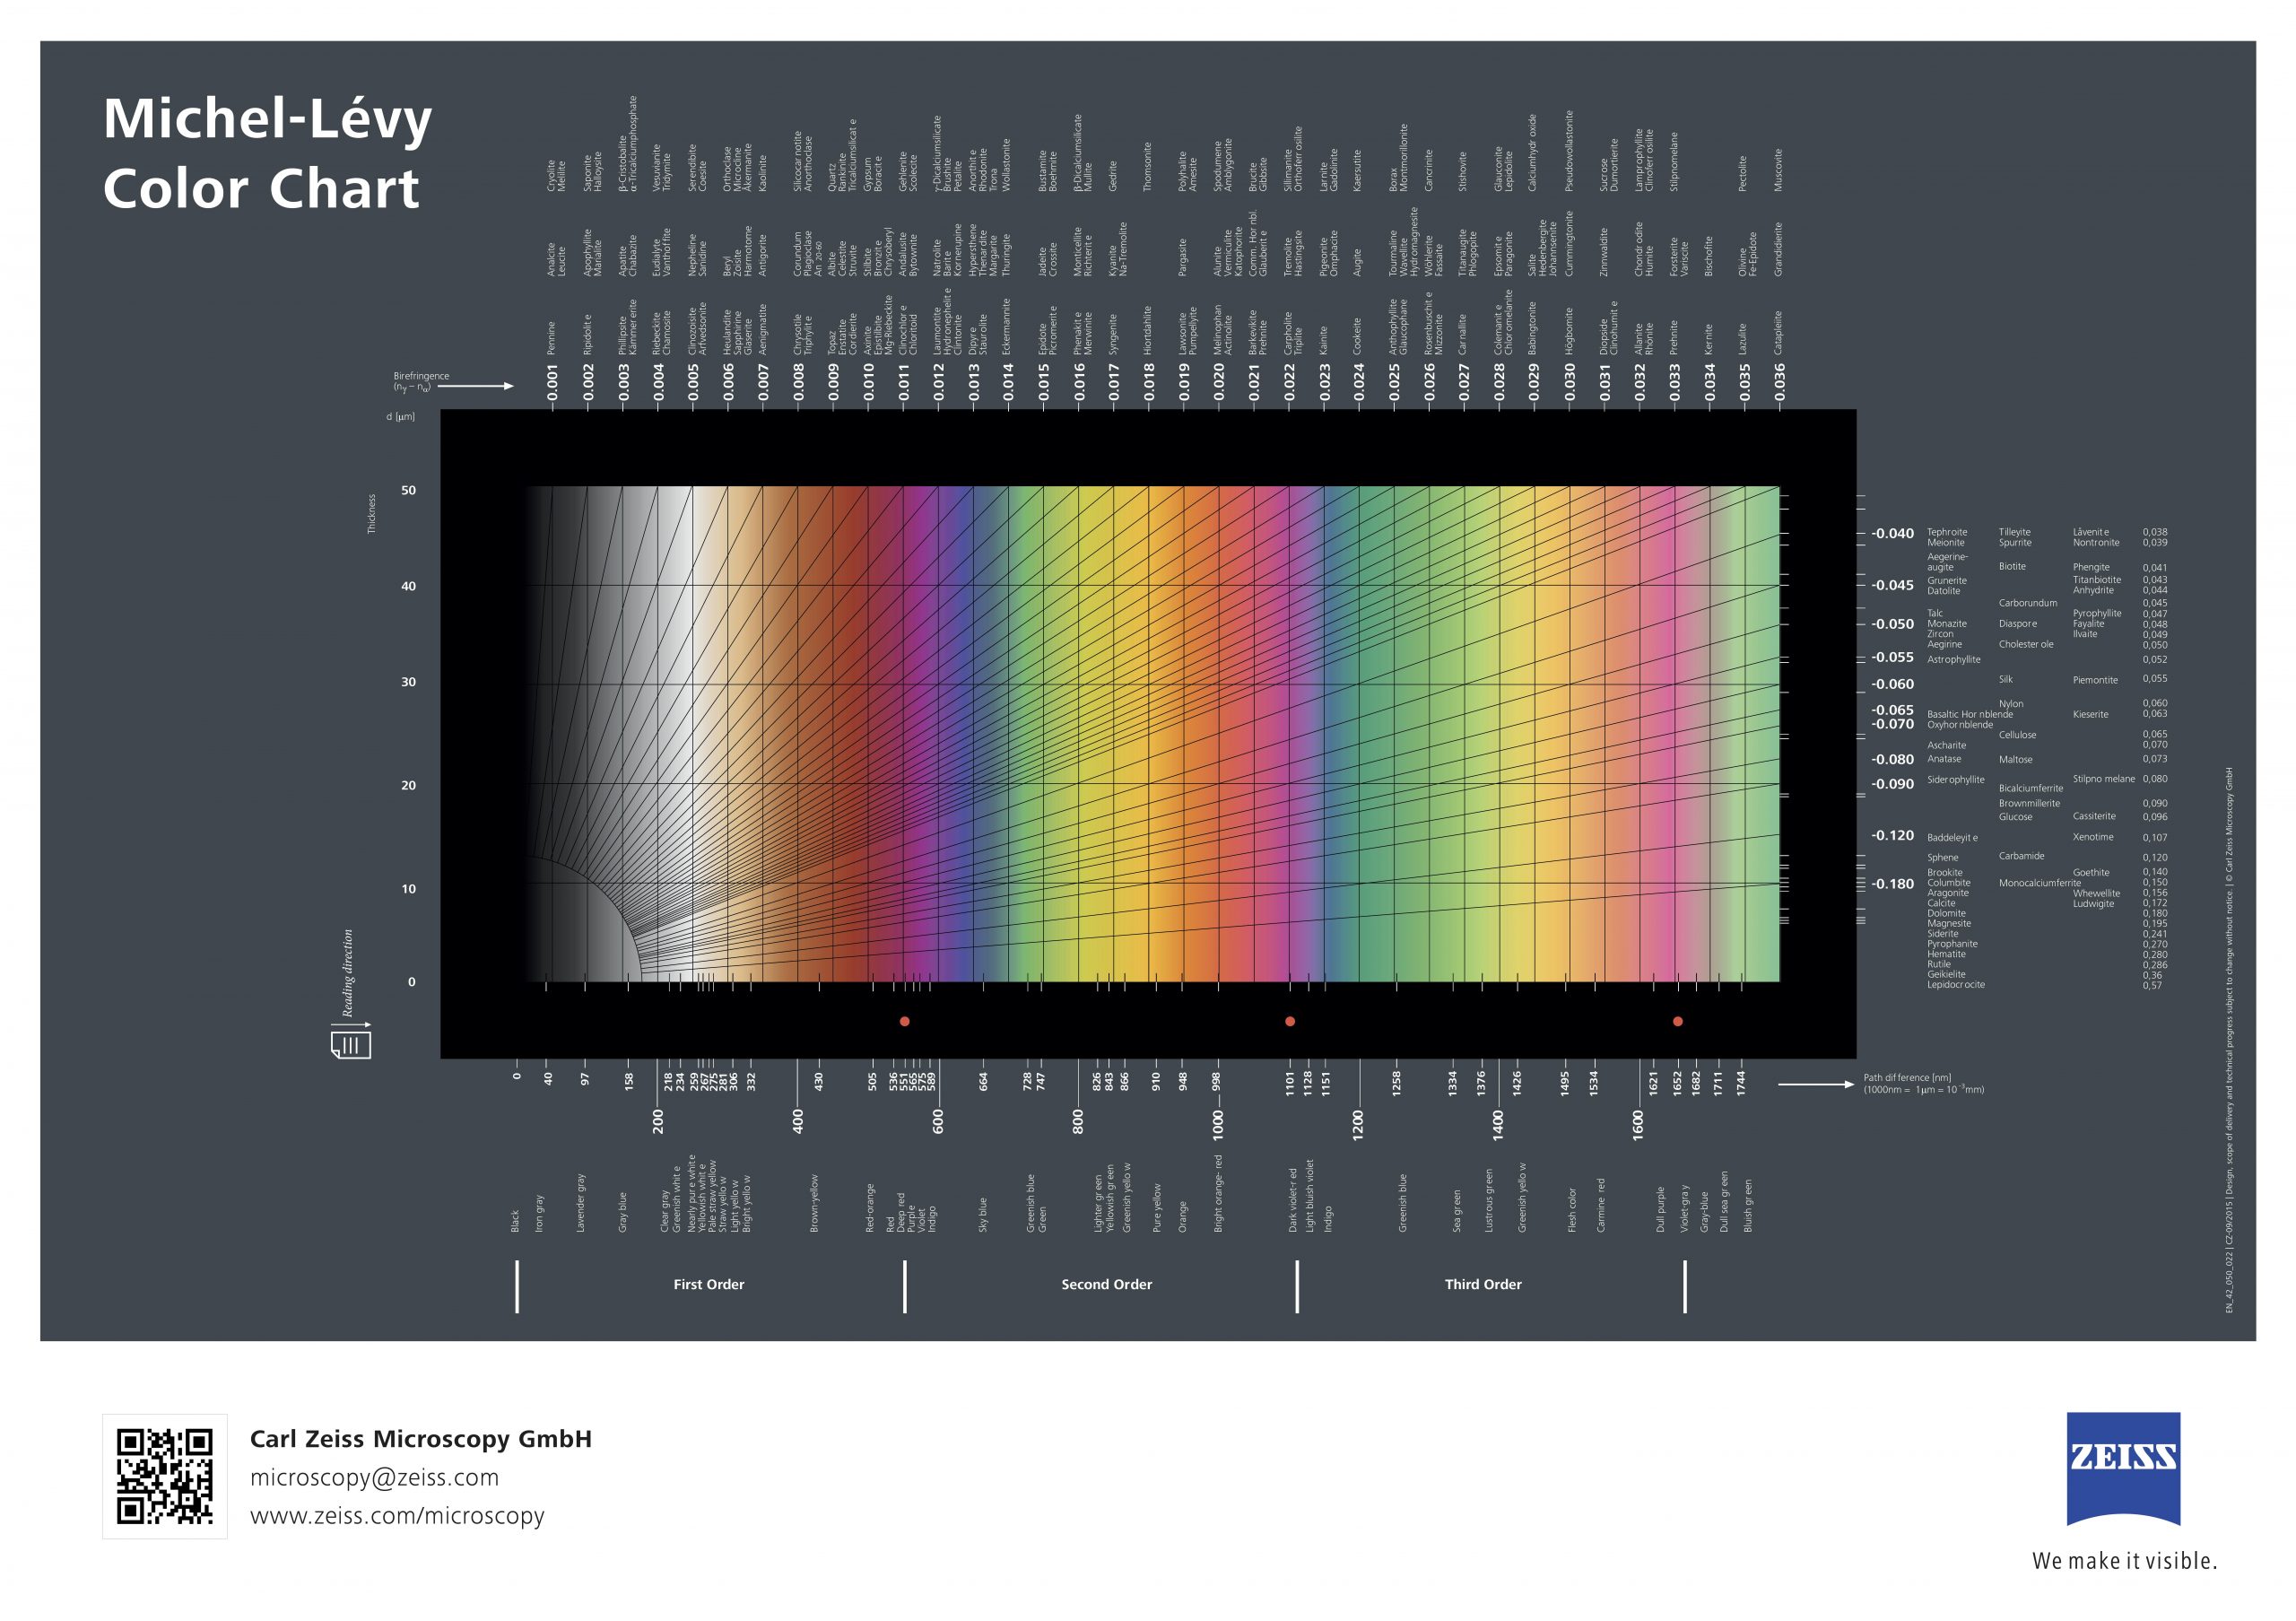 Figure 2.7.5. The Michel-Levy Interference Color Chart.